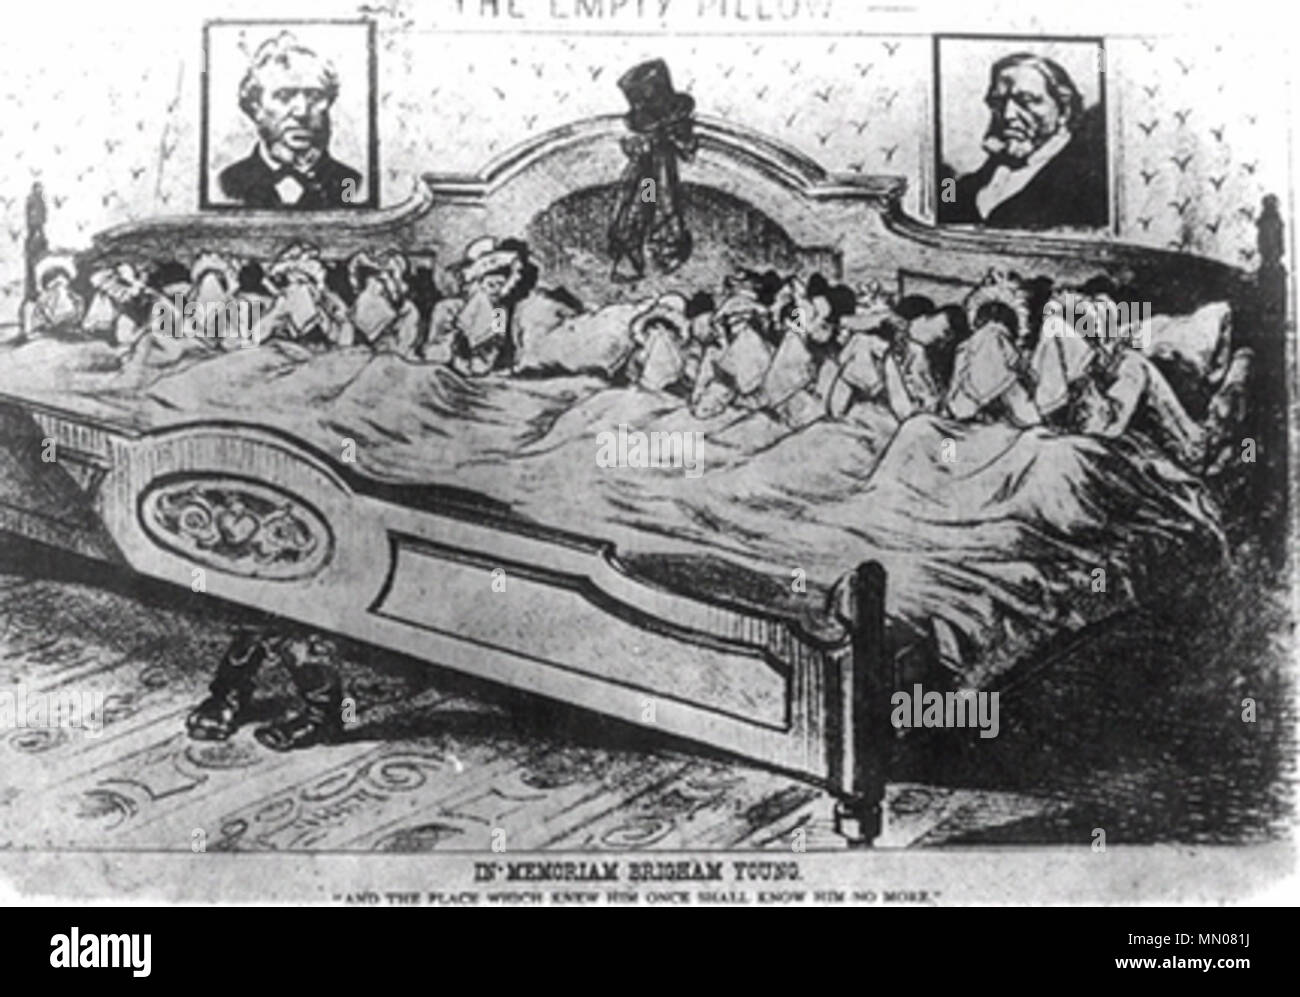 . English: Brigham Young's 12 widows lament. Caricature in a newspaper about Mormon polygamy. Text:'In memoriam Brigham Young. And the place which knew him once shall know him no more' It references the apocryphal 'long bed' story (and illustration) found in chapter 15 of Mark Twain's 1872 book Roughing It.  . 1877. Unknown In memoriam brigham young 2 Stock Photo